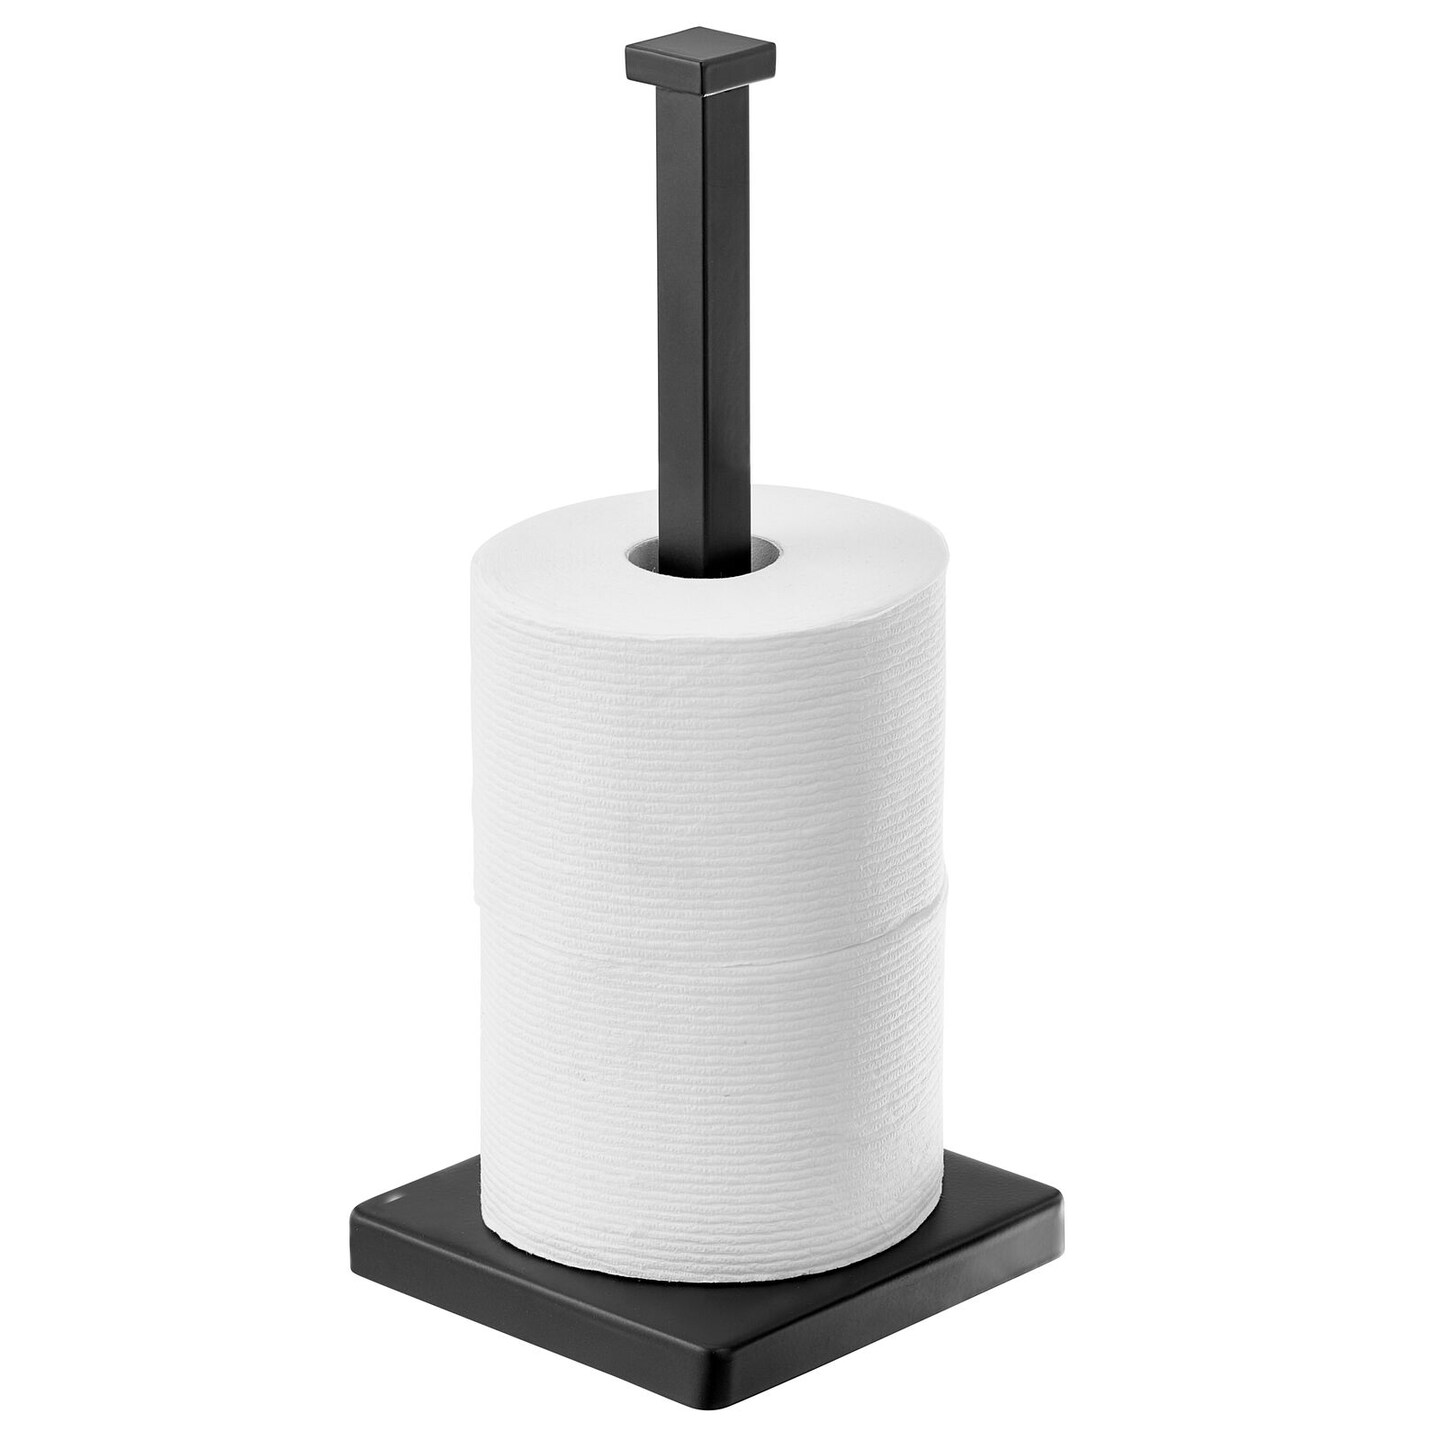 Mdesign Metal Free Standing Toilet Paper Stand/dispenser, Holds